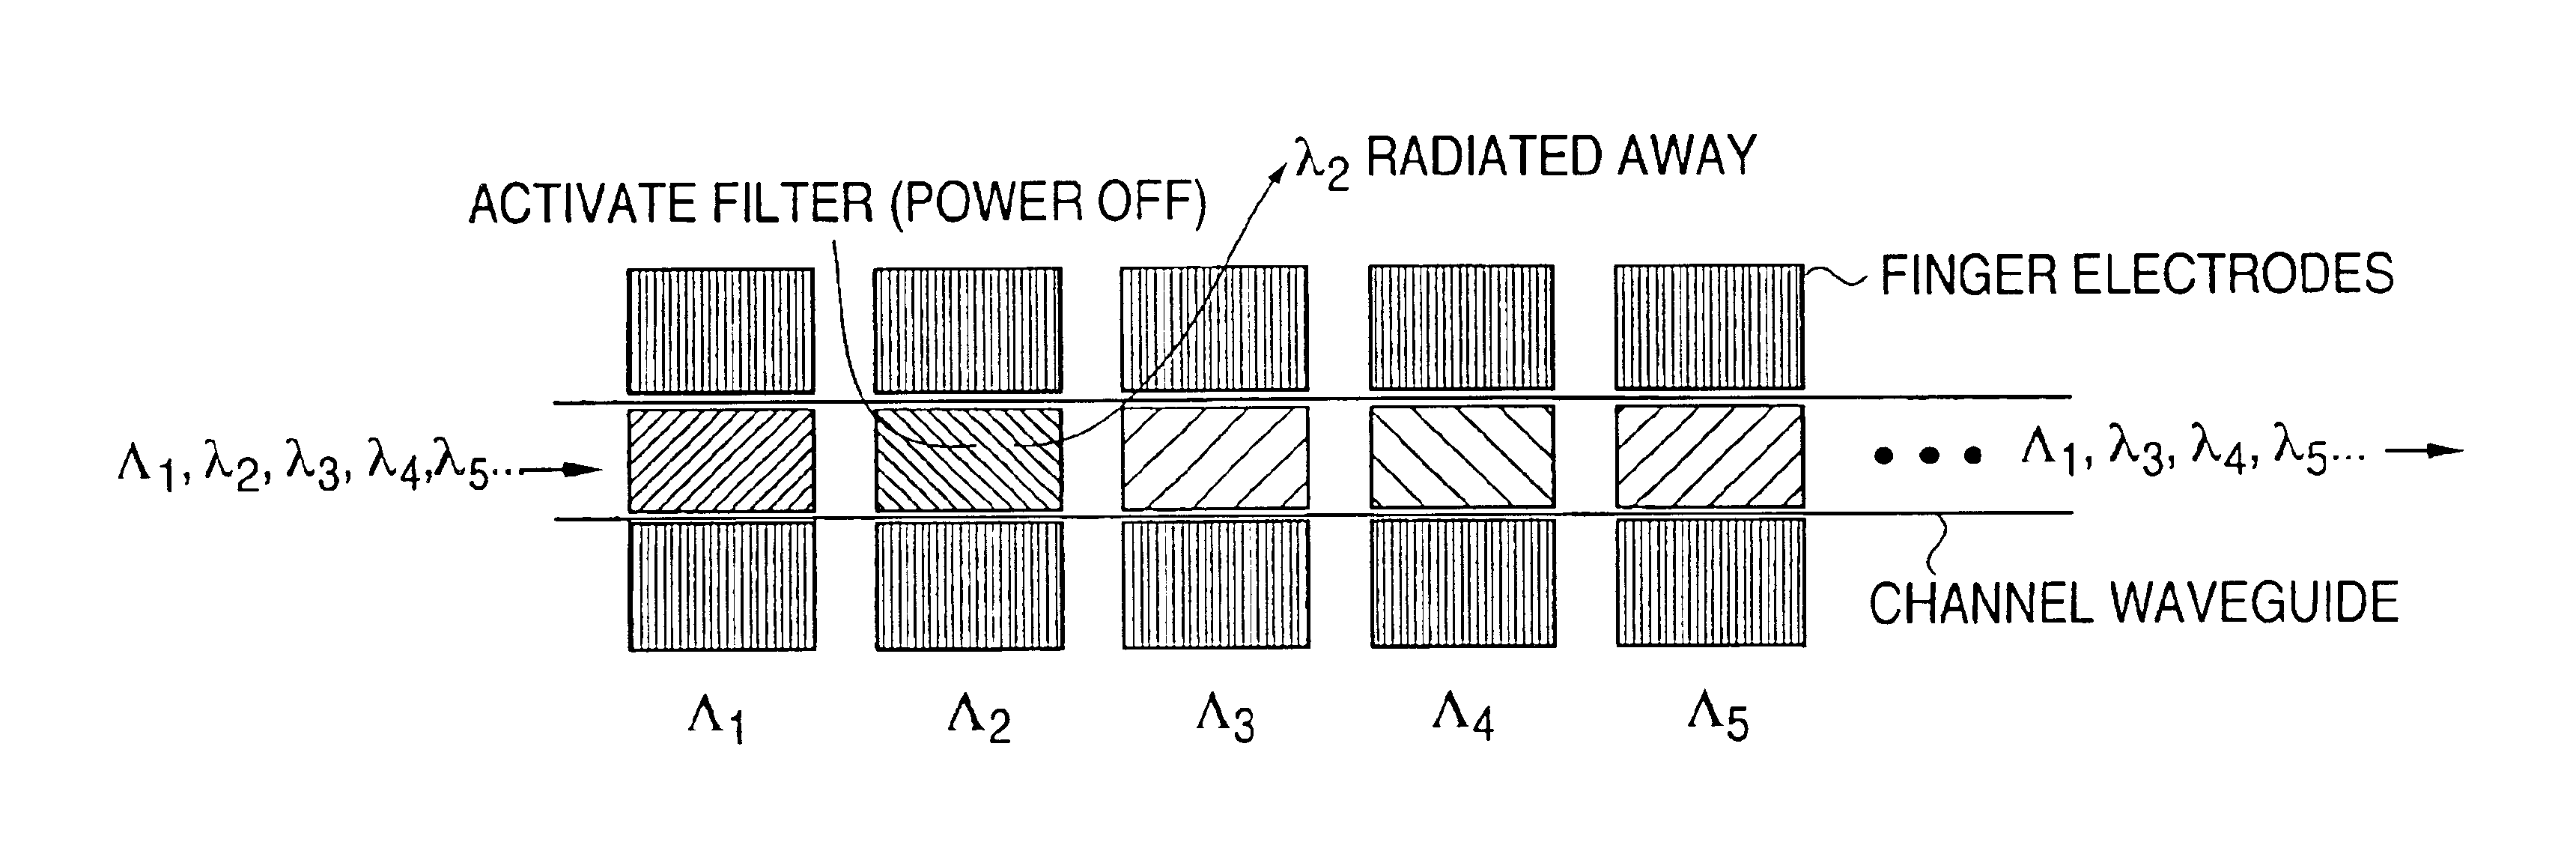 Switchable polymer-dispersed liquid crystal optical elements